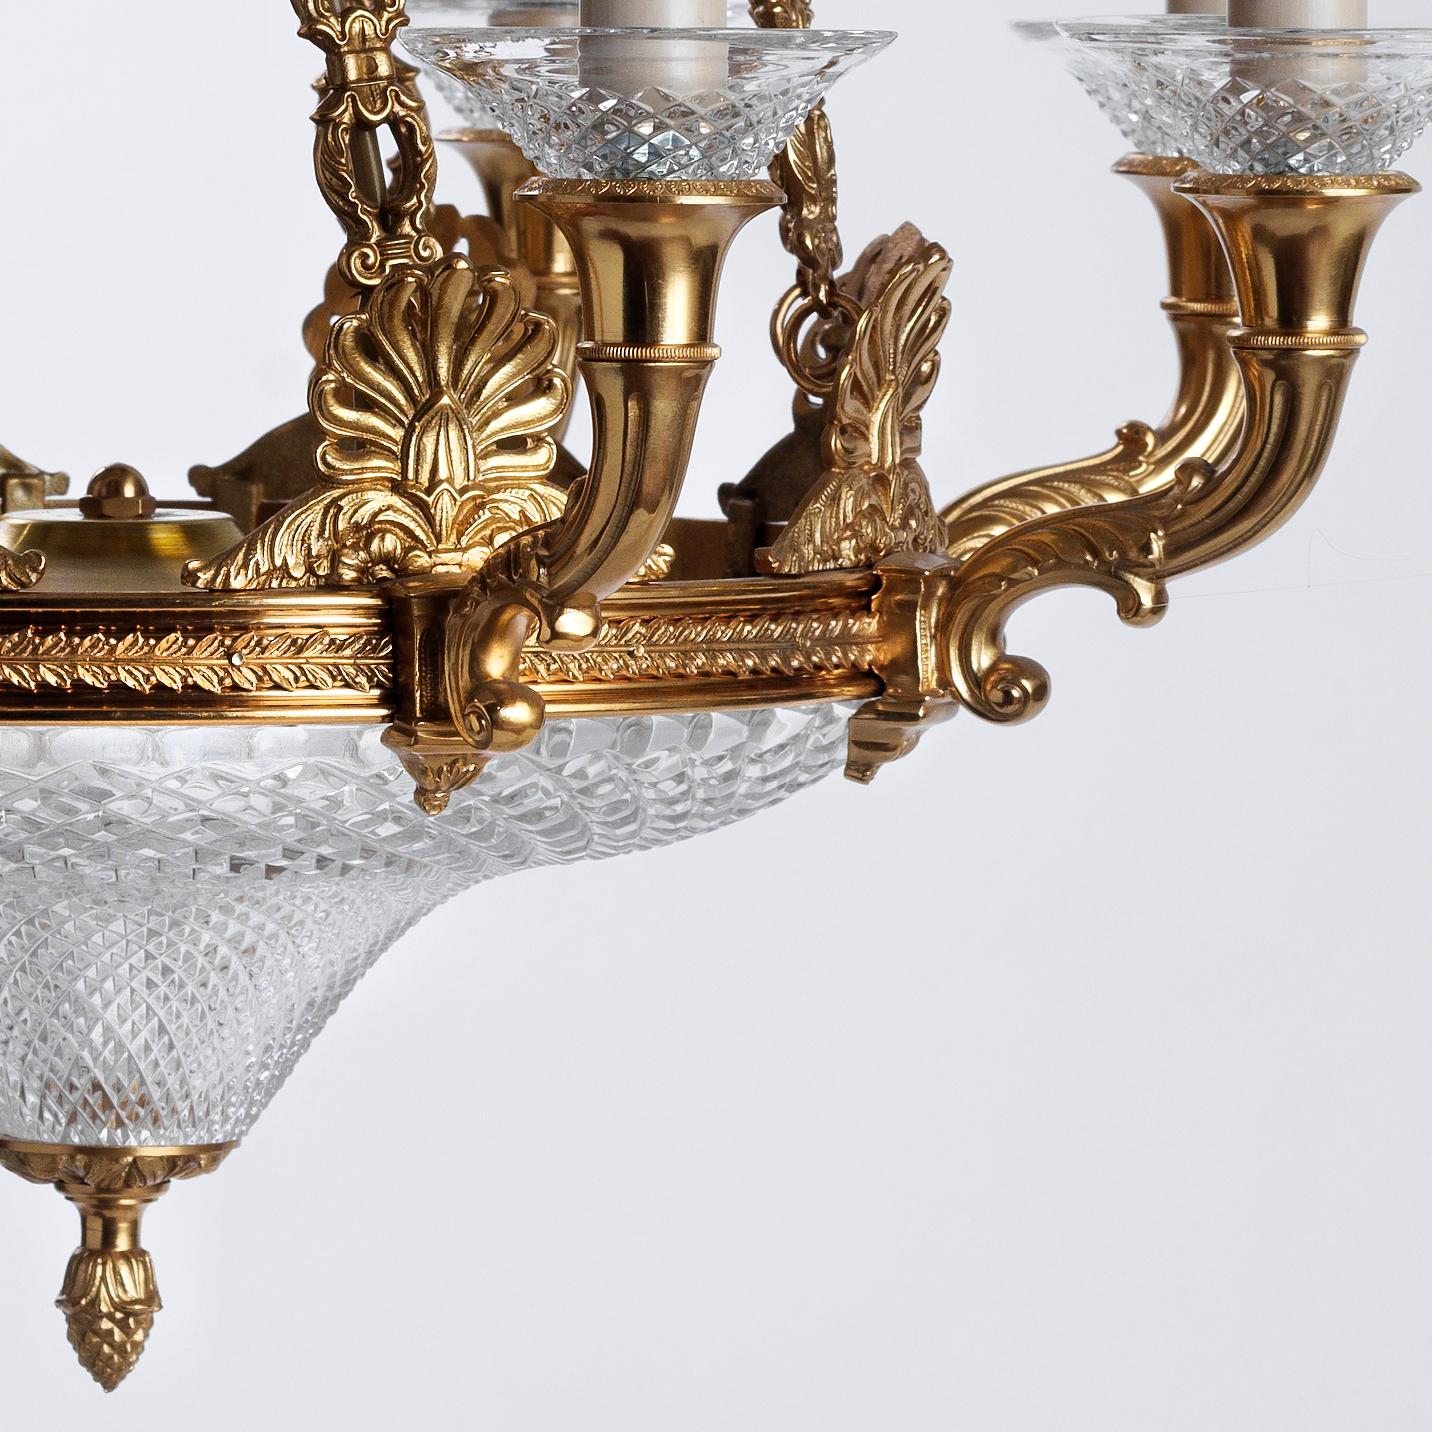 French Empire style gilt bronze and cut crystal chandelier by Gherardo Degli Albizzi with eight lights.
This chandelier is characterized by classical plate embellished with gilt bronze acroterio and cornucopias arms. At the top there is a decorative